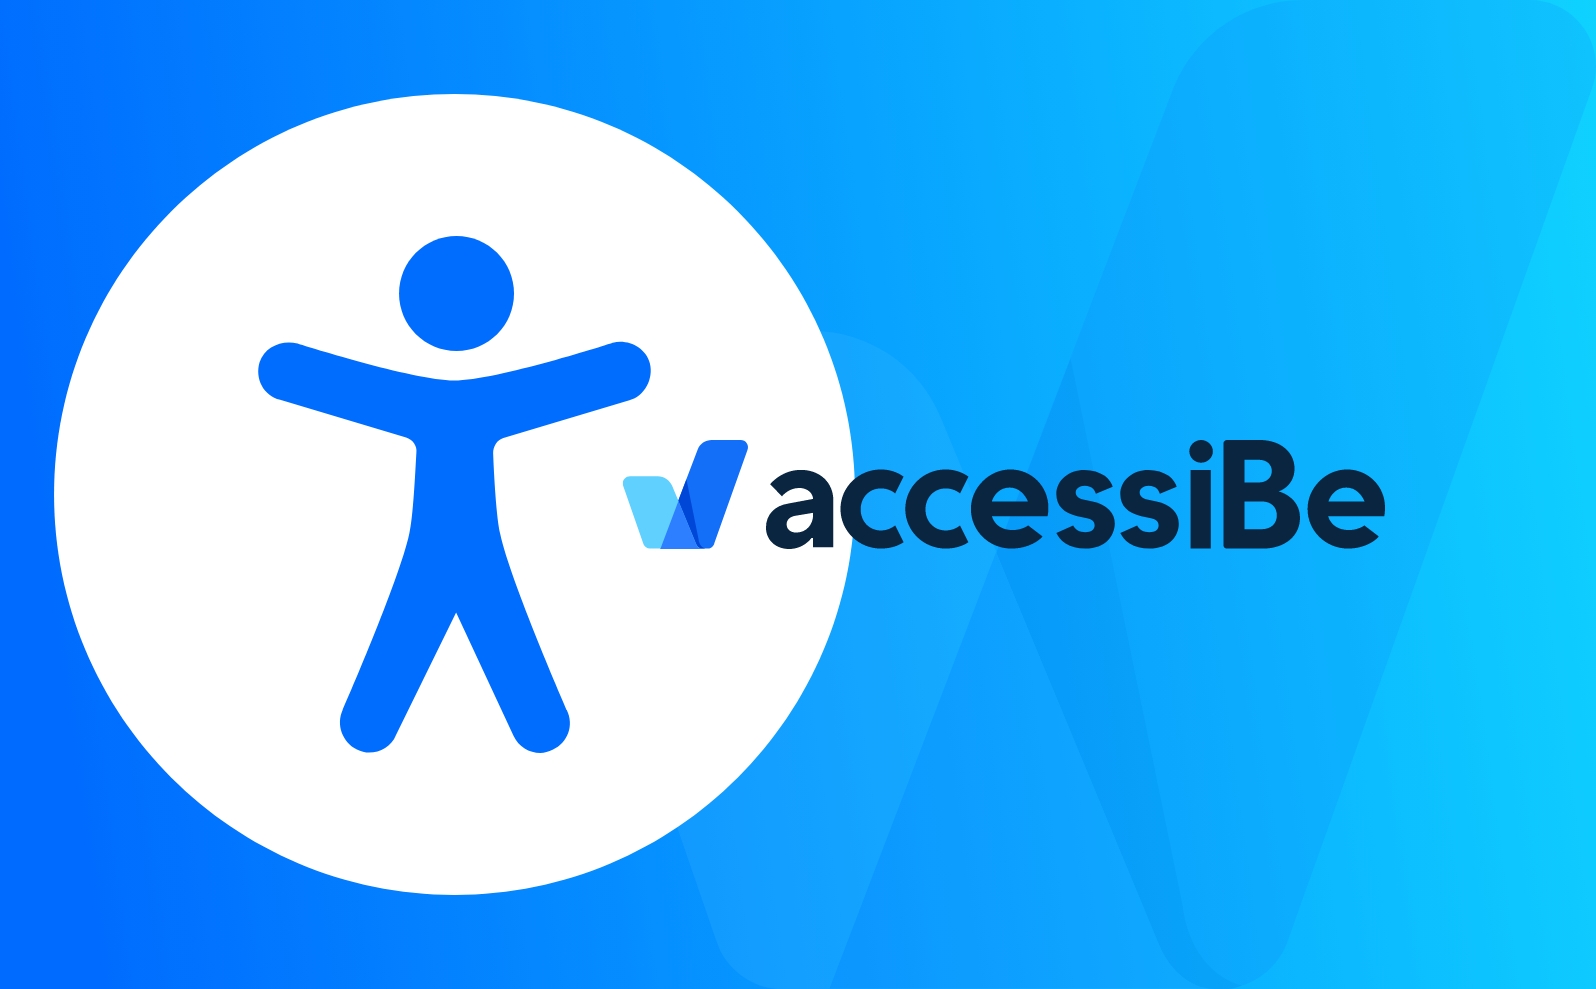 SoSimple Partners with accessiBe to Offer Clients an Automated Website Accessibility Solution